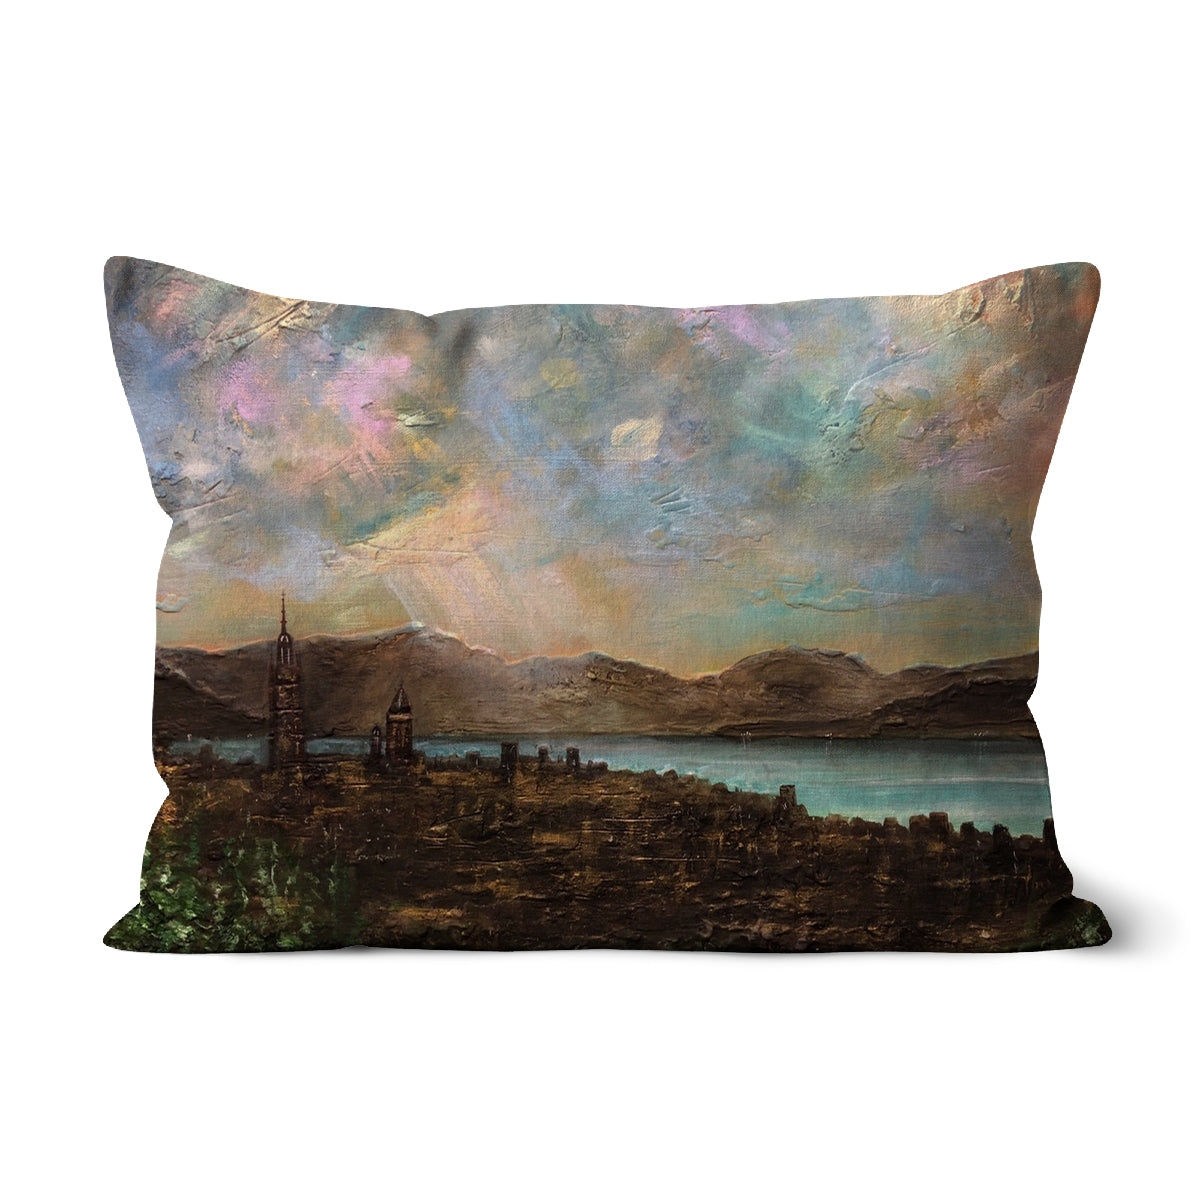 Angels Fingers Over Greenock Art Gifts Cushion-Cushions-River Clyde Art Gallery-Linen-19"x13"-Paintings, Prints, Homeware, Art Gifts From Scotland By Scottish Artist Kevin Hunter